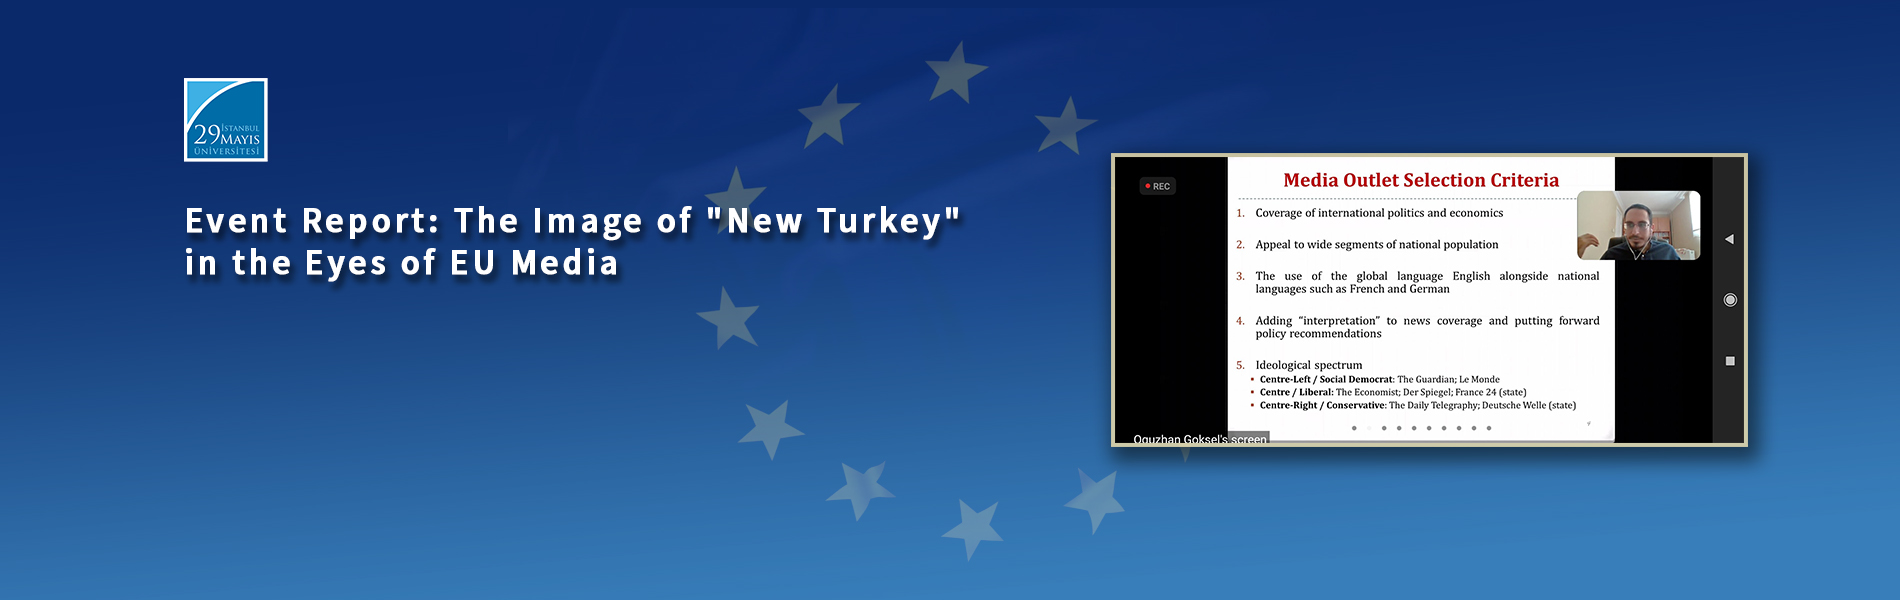 The Image of "New Turkey" in the Eyes of EU Media